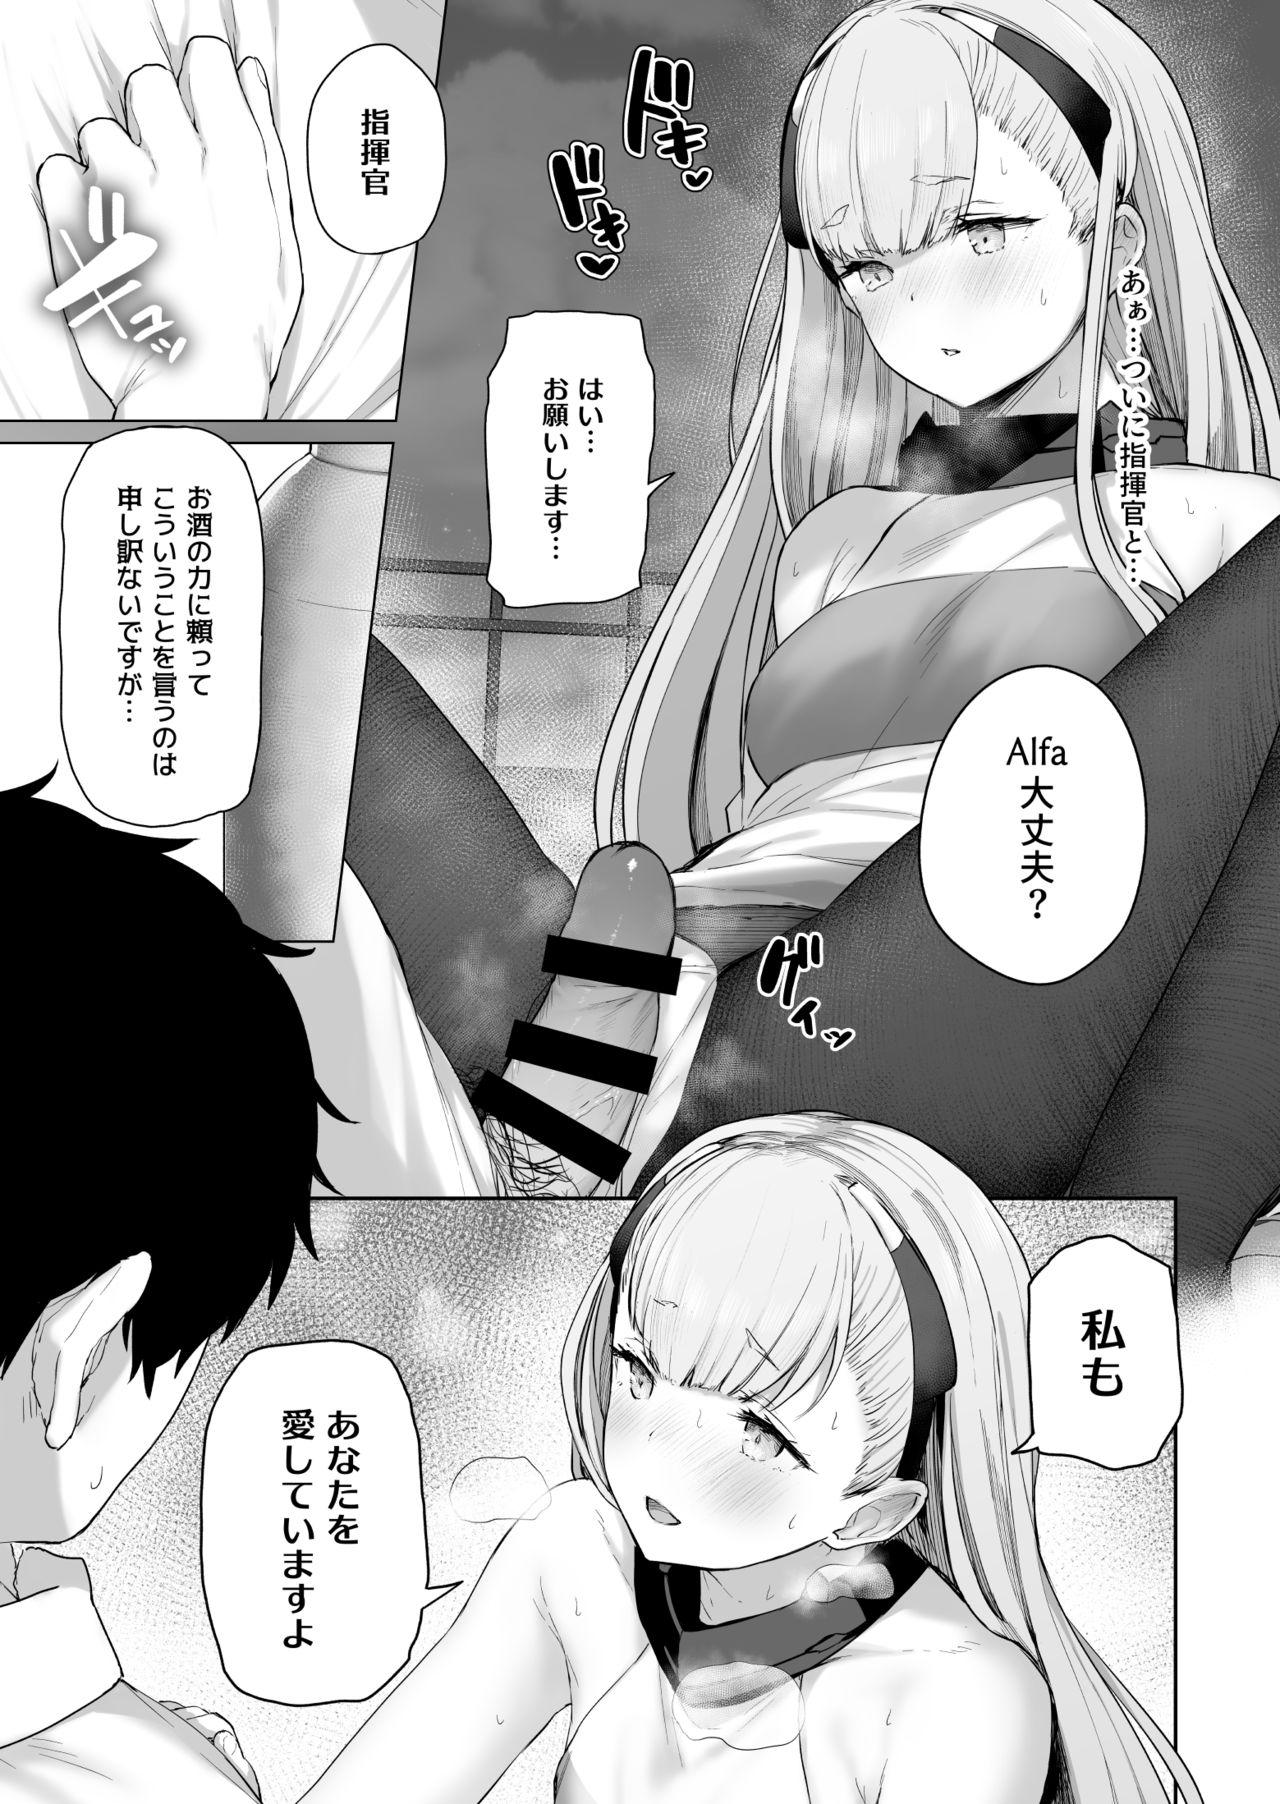 Monster AK-Alfa - Girls frontline Ass To Mouth - Page 10